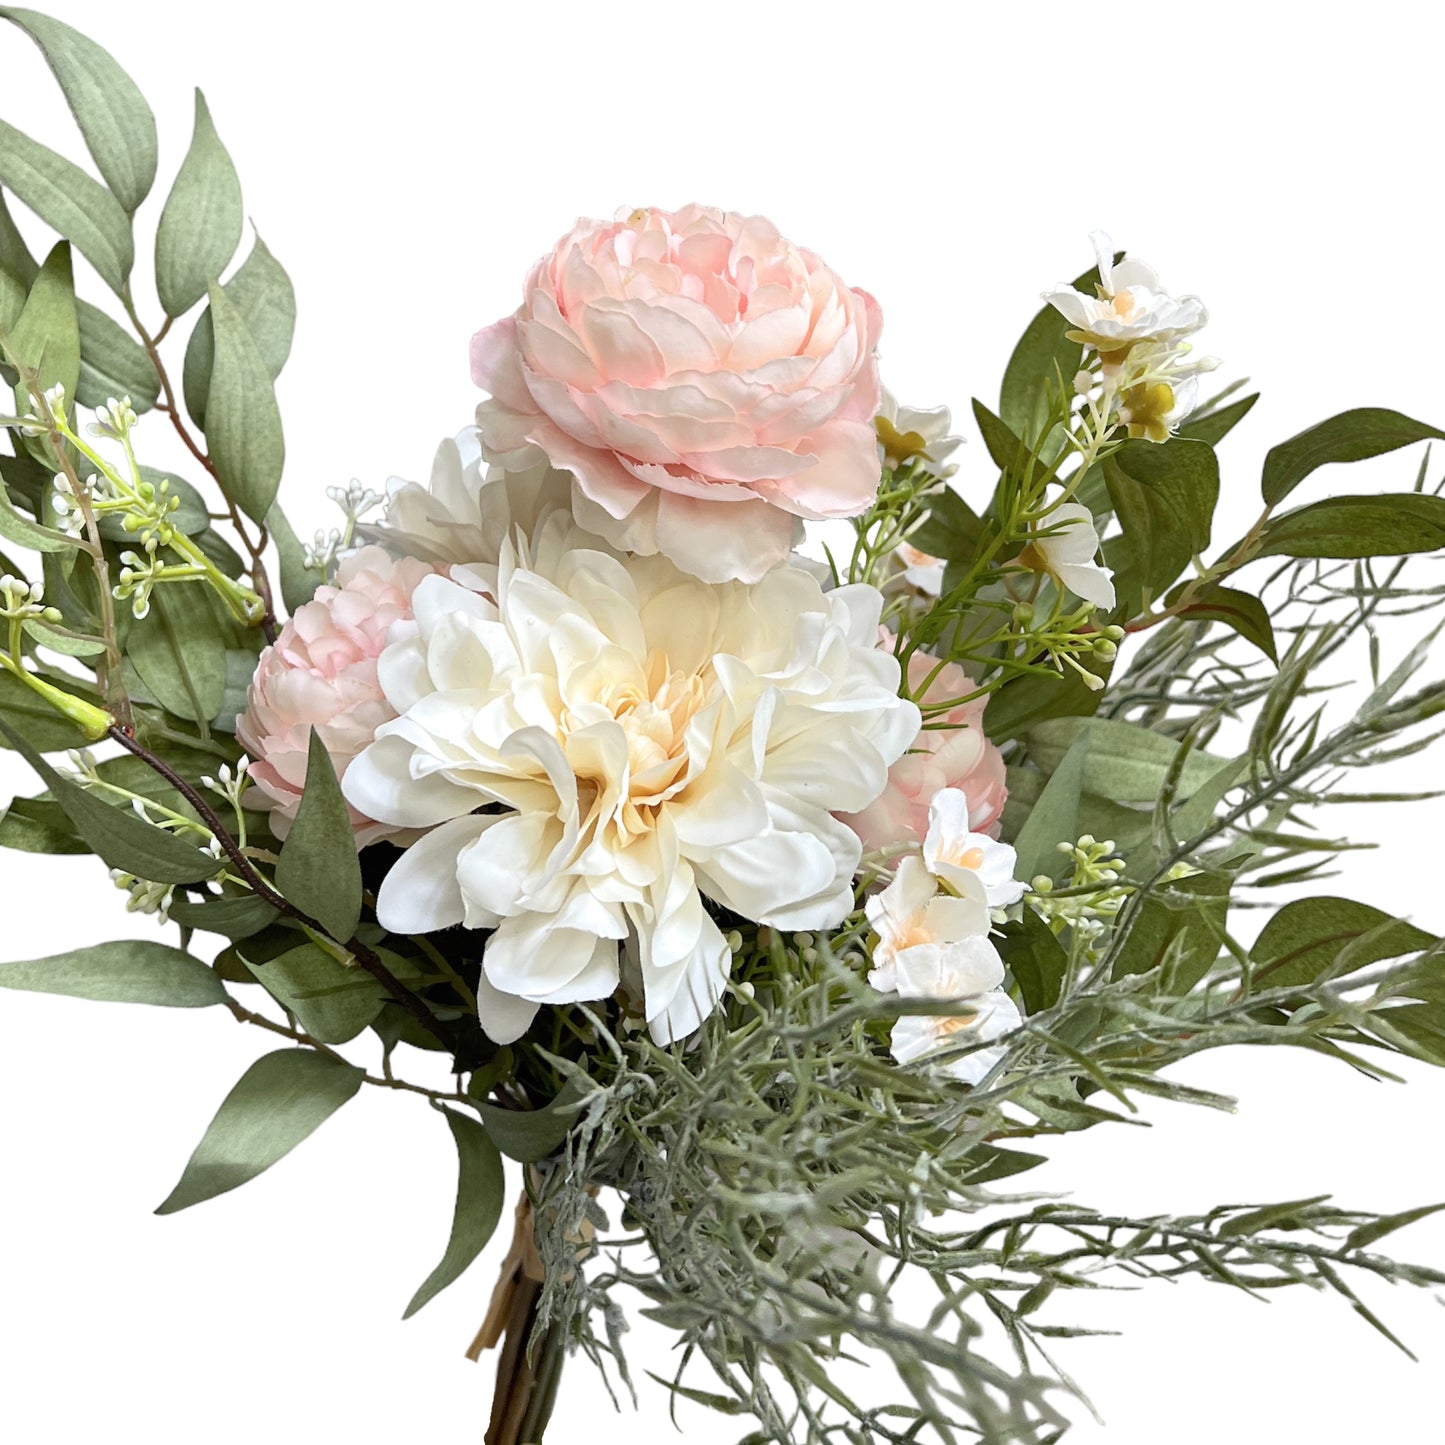 Artificial Flower Bouquet - Peony and Dahlia Floral Arrangement for Any Occasion